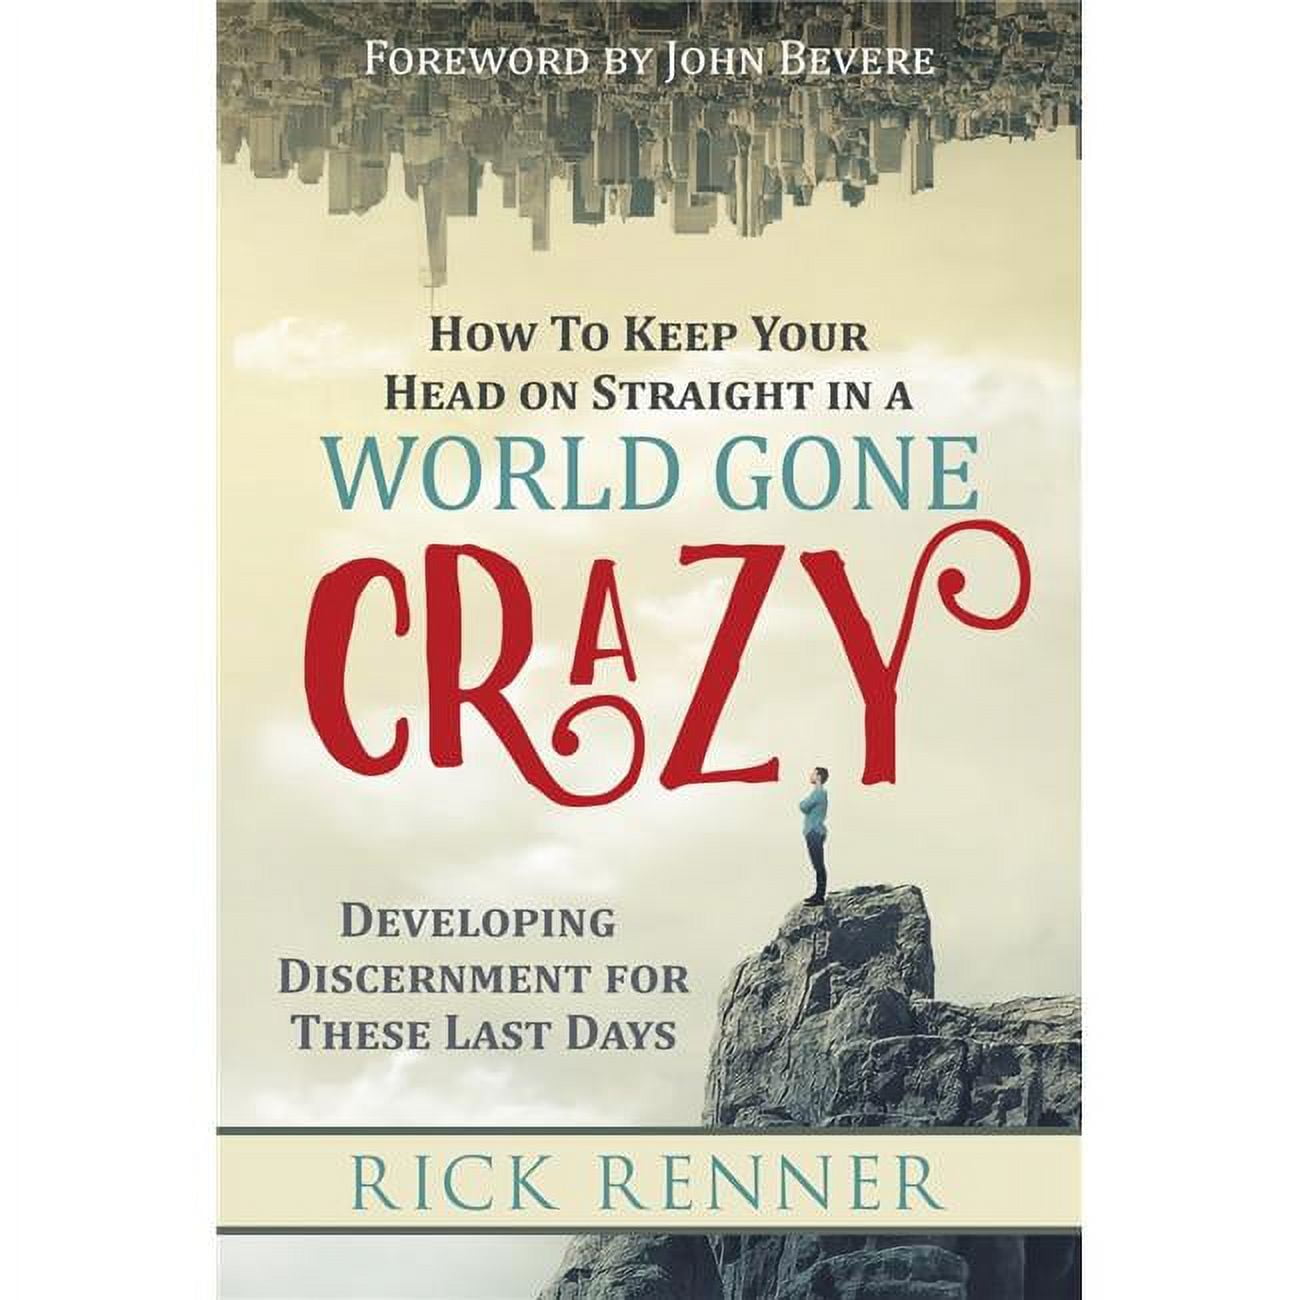 165180 How To Keep Your Head On Straight In A World Gone Crazy